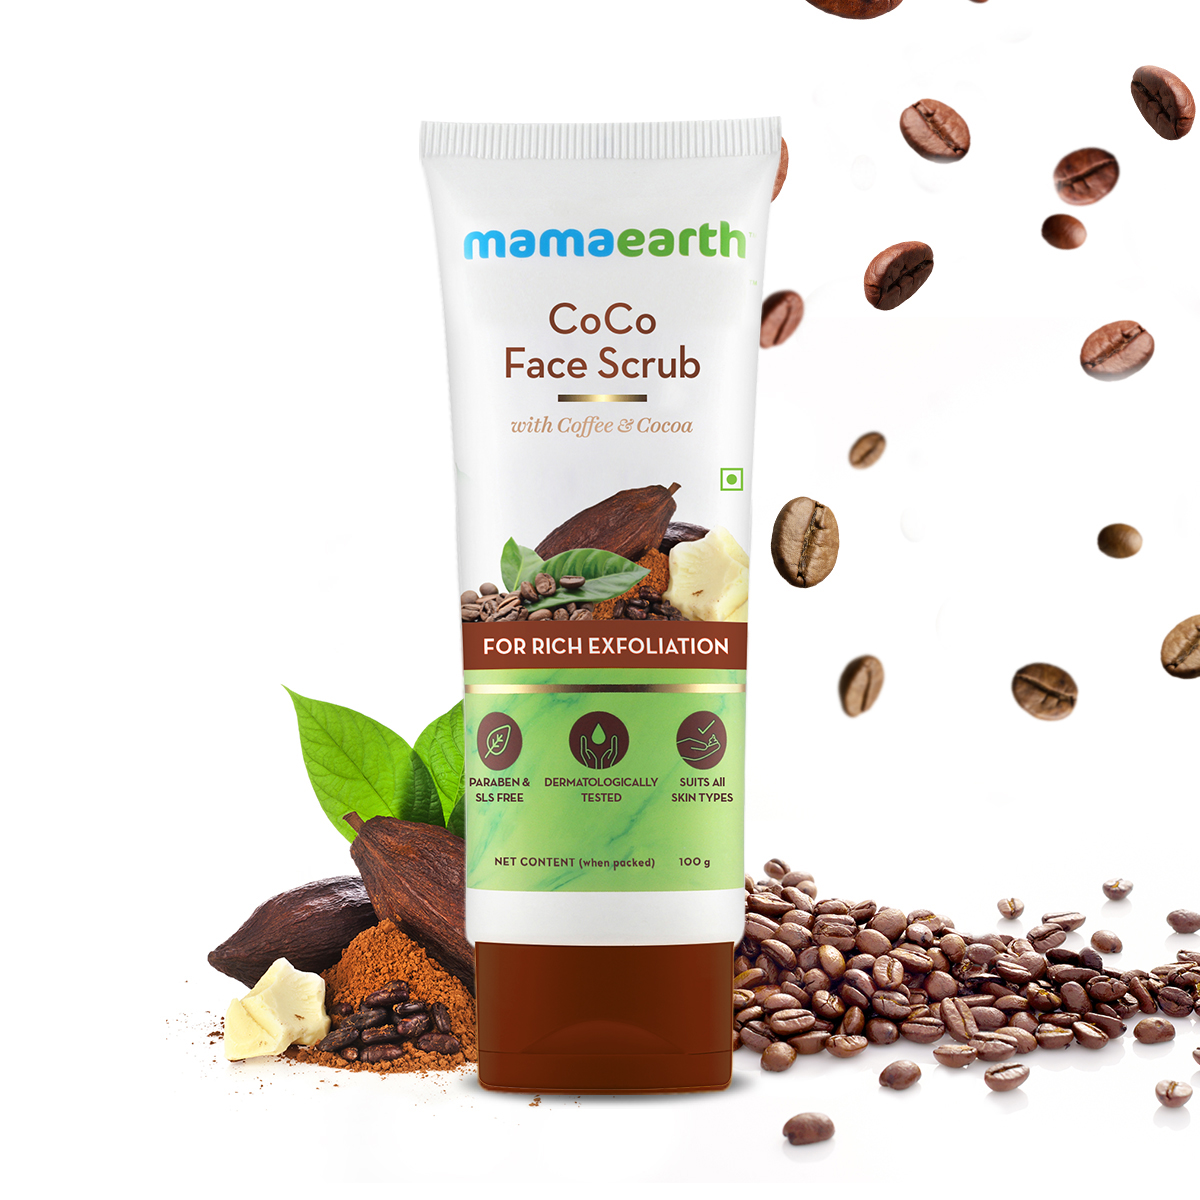 MamaEarth Coco Face Scrub with Coffee and Cocoa for Rich Exfoliation, 100gm